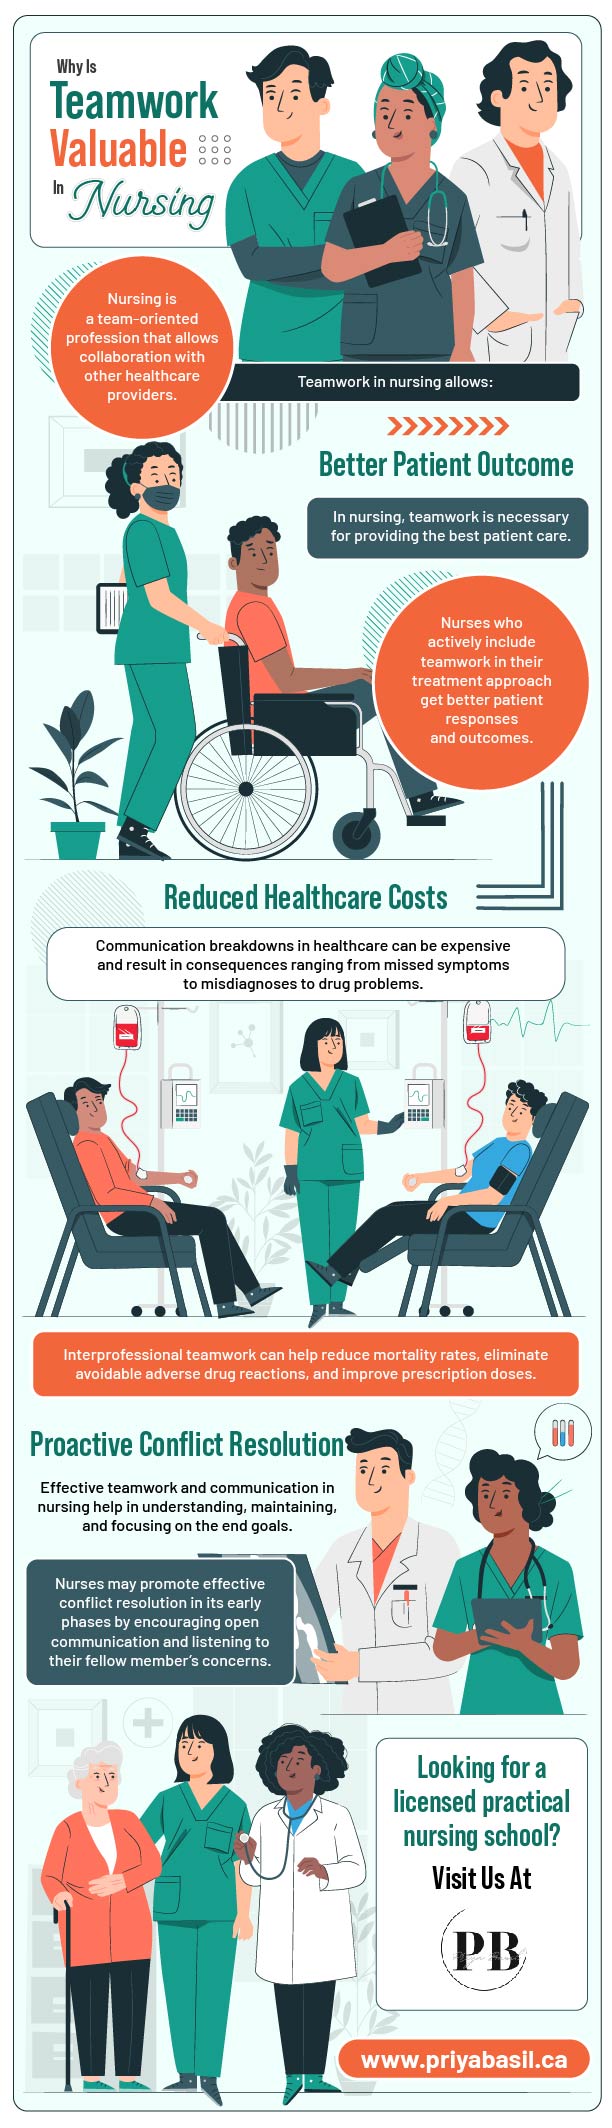 Why Is Teamwork Valuable In Nursing? - Infograph